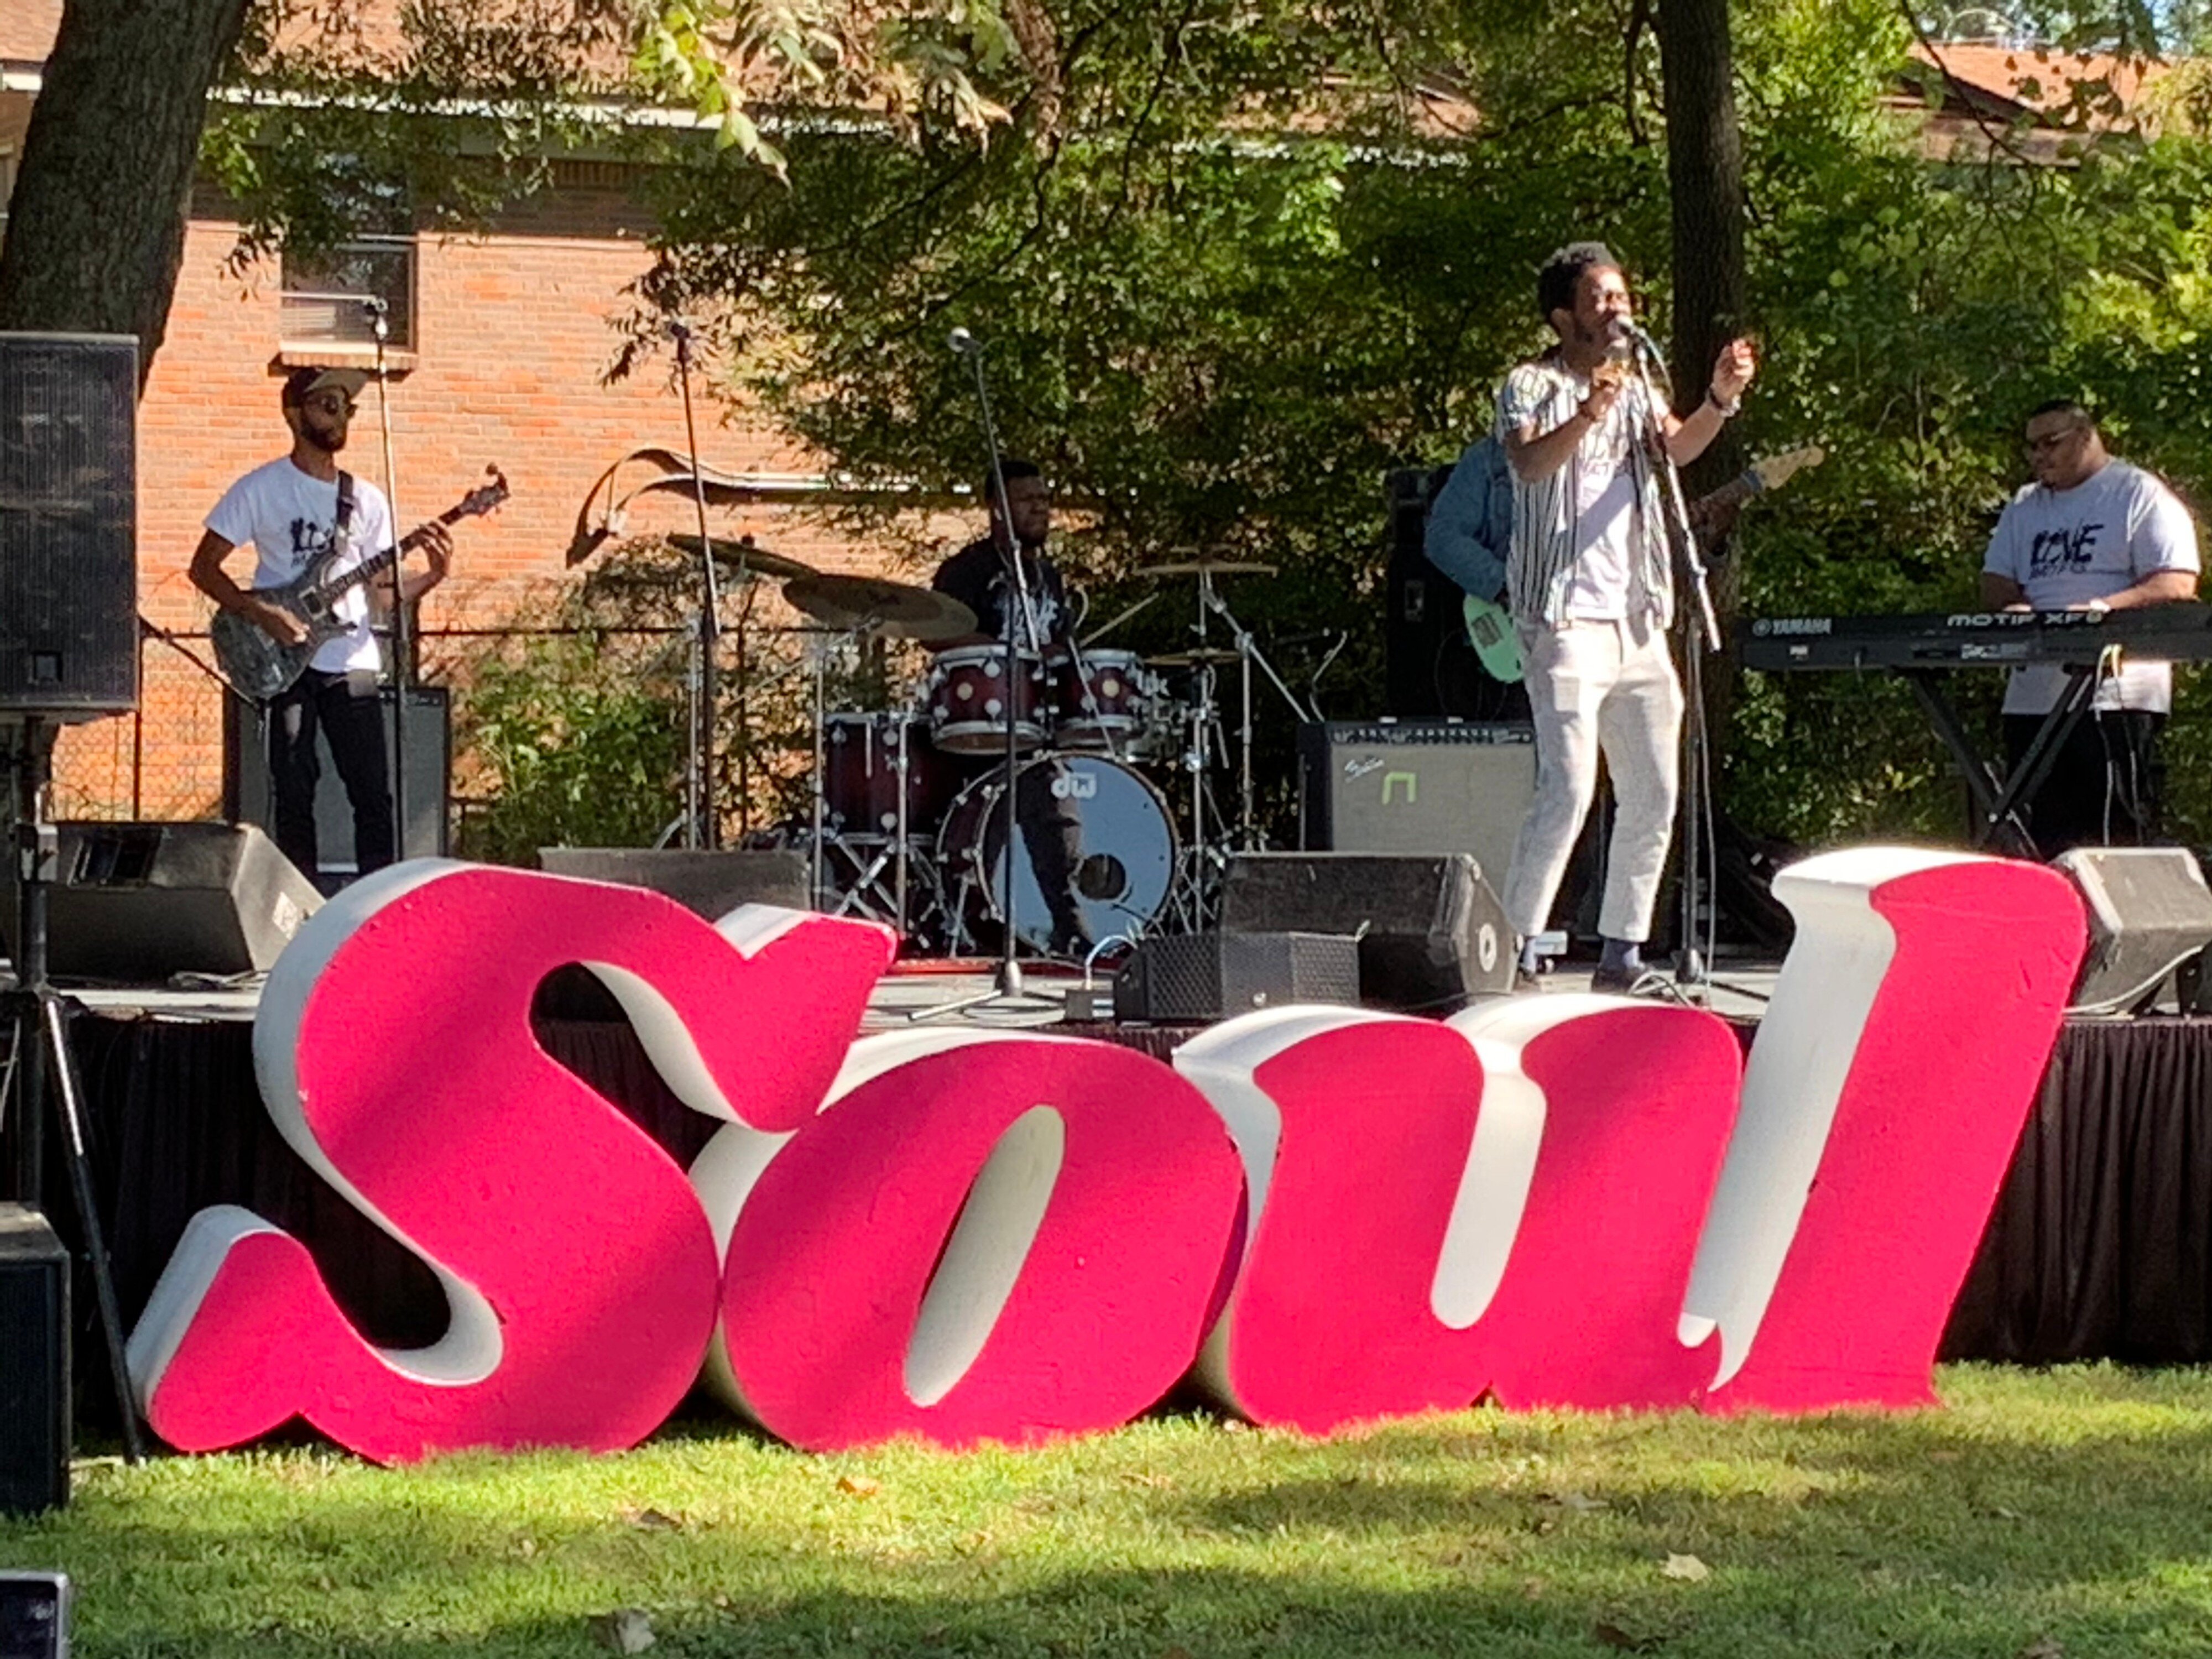 Musical artist J Buck performed on the Bring Your Soul stage at the 5th annual SoulsvilleUSA Festival. (Kim and Jim Coleman)